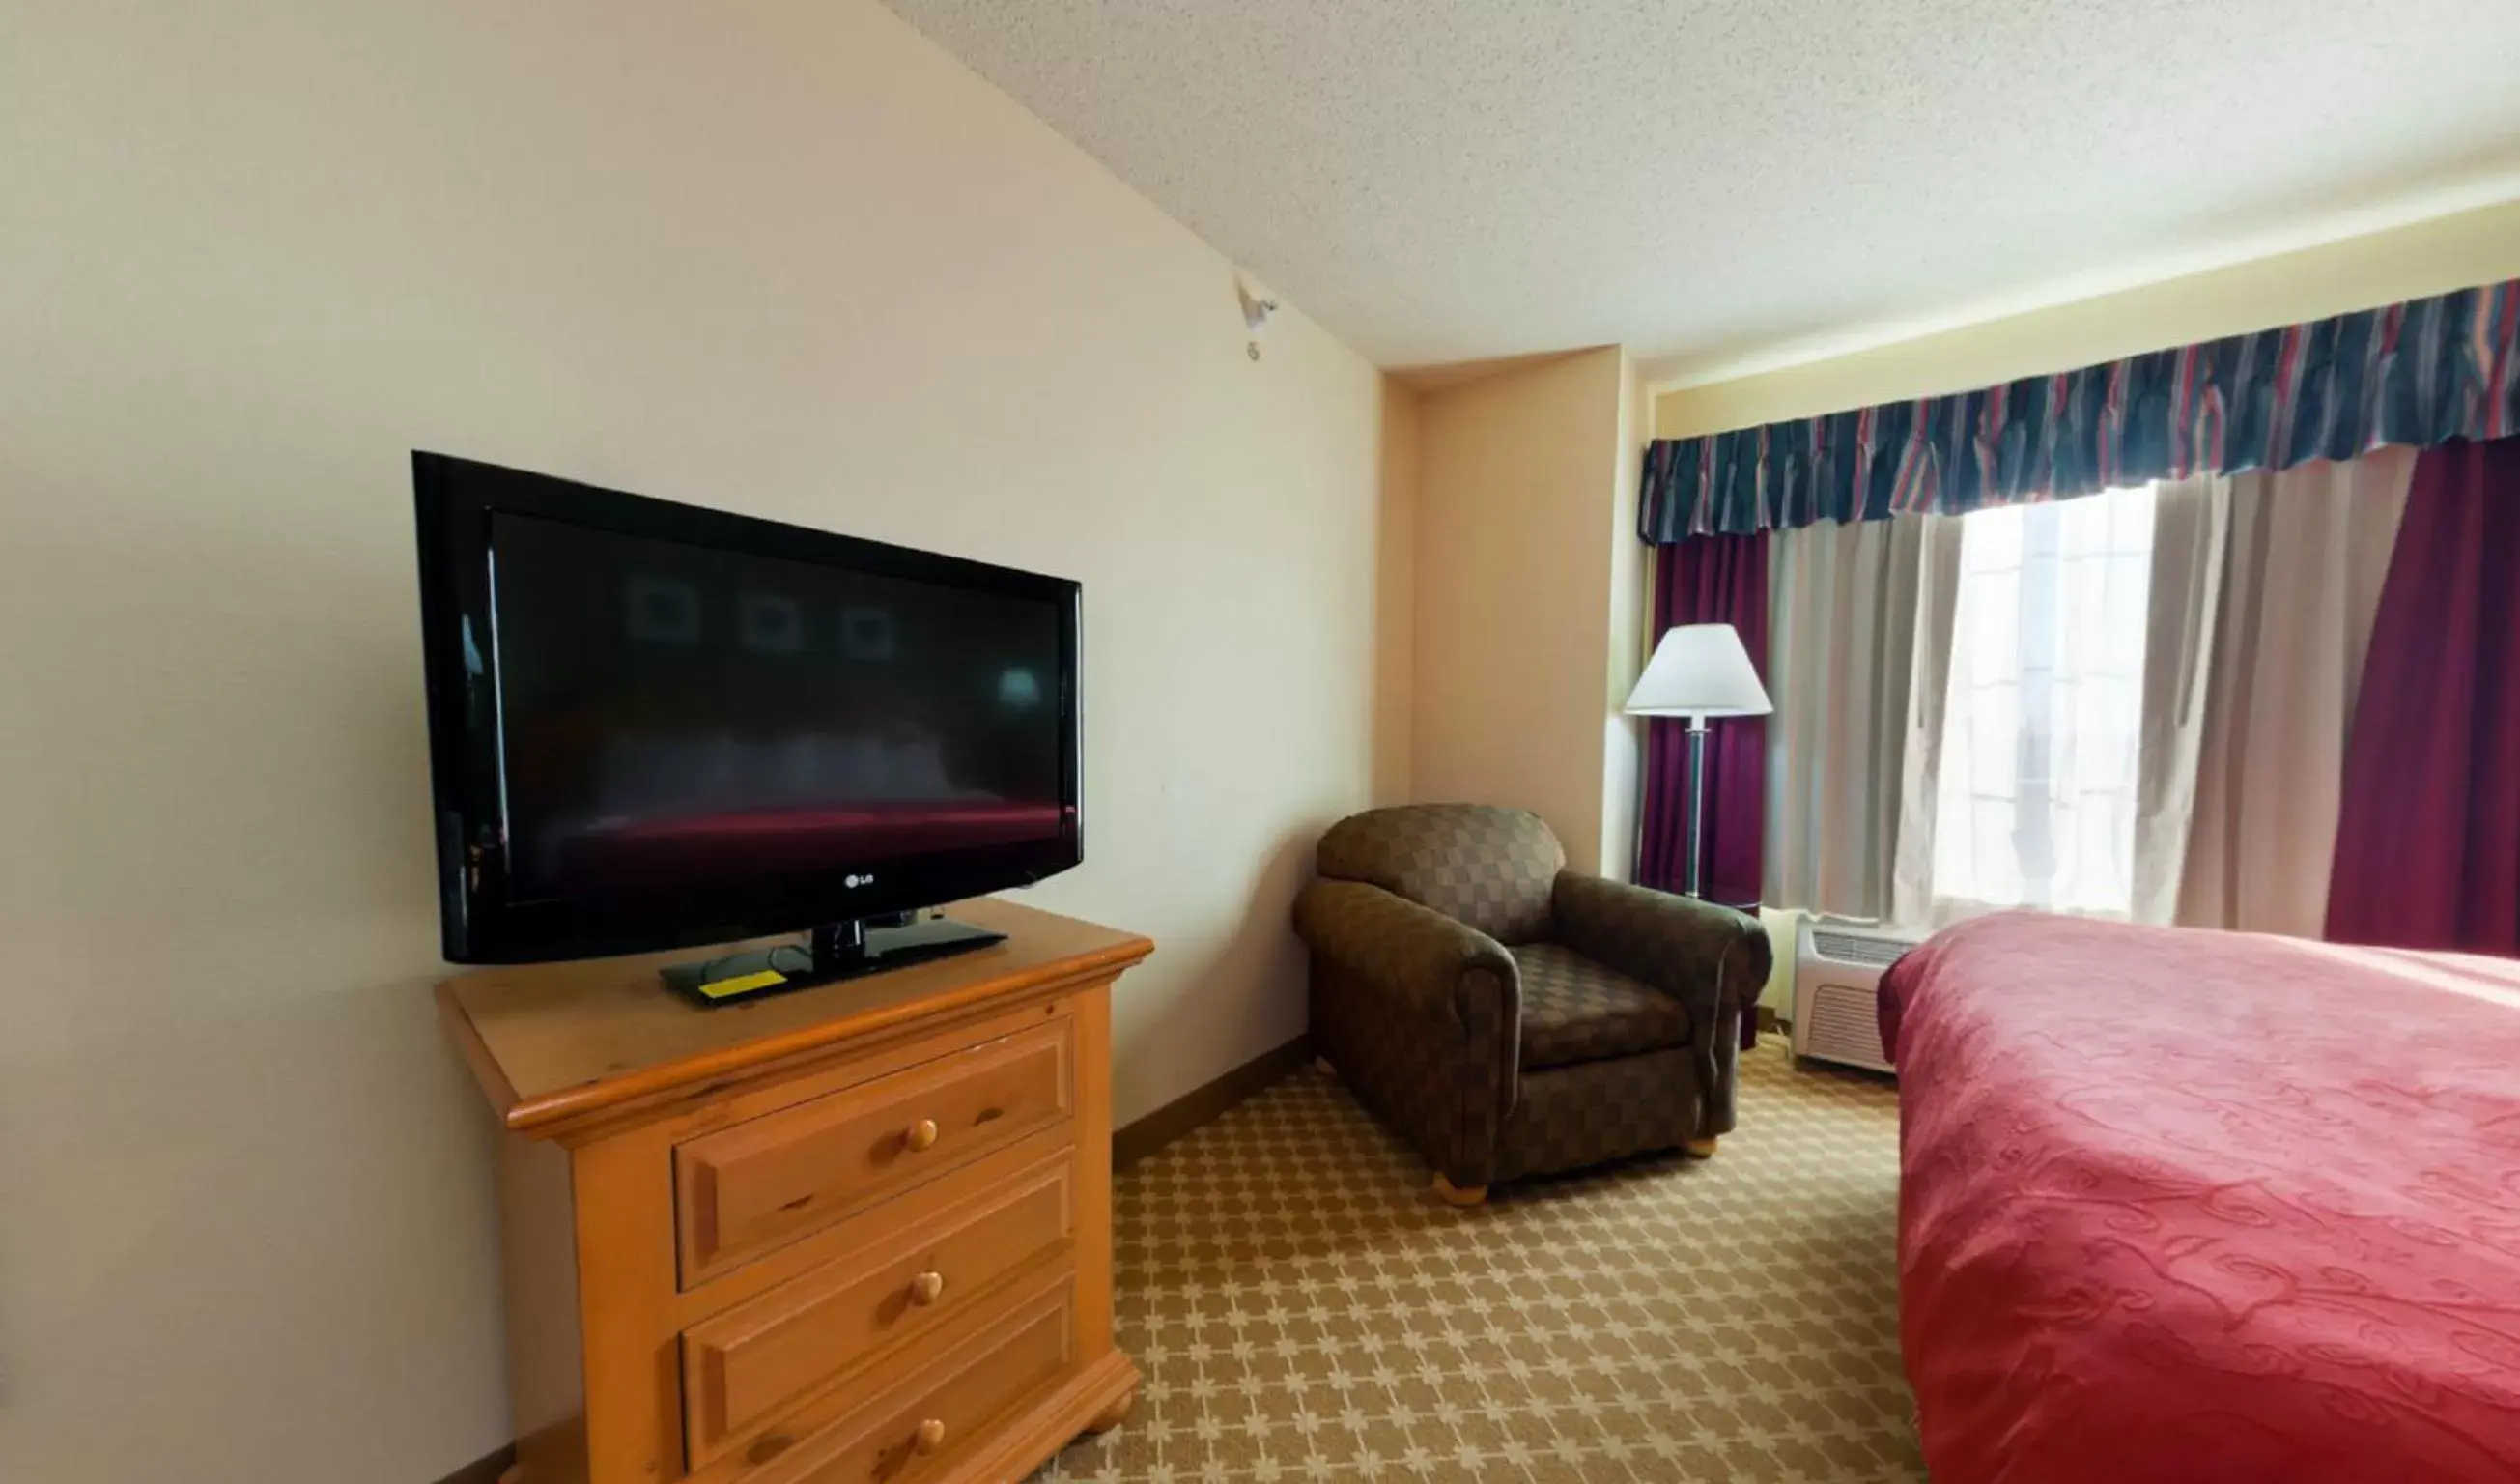 People, TV/Entertainment Center in AmericInn by Wyndham, Galesburg, IL